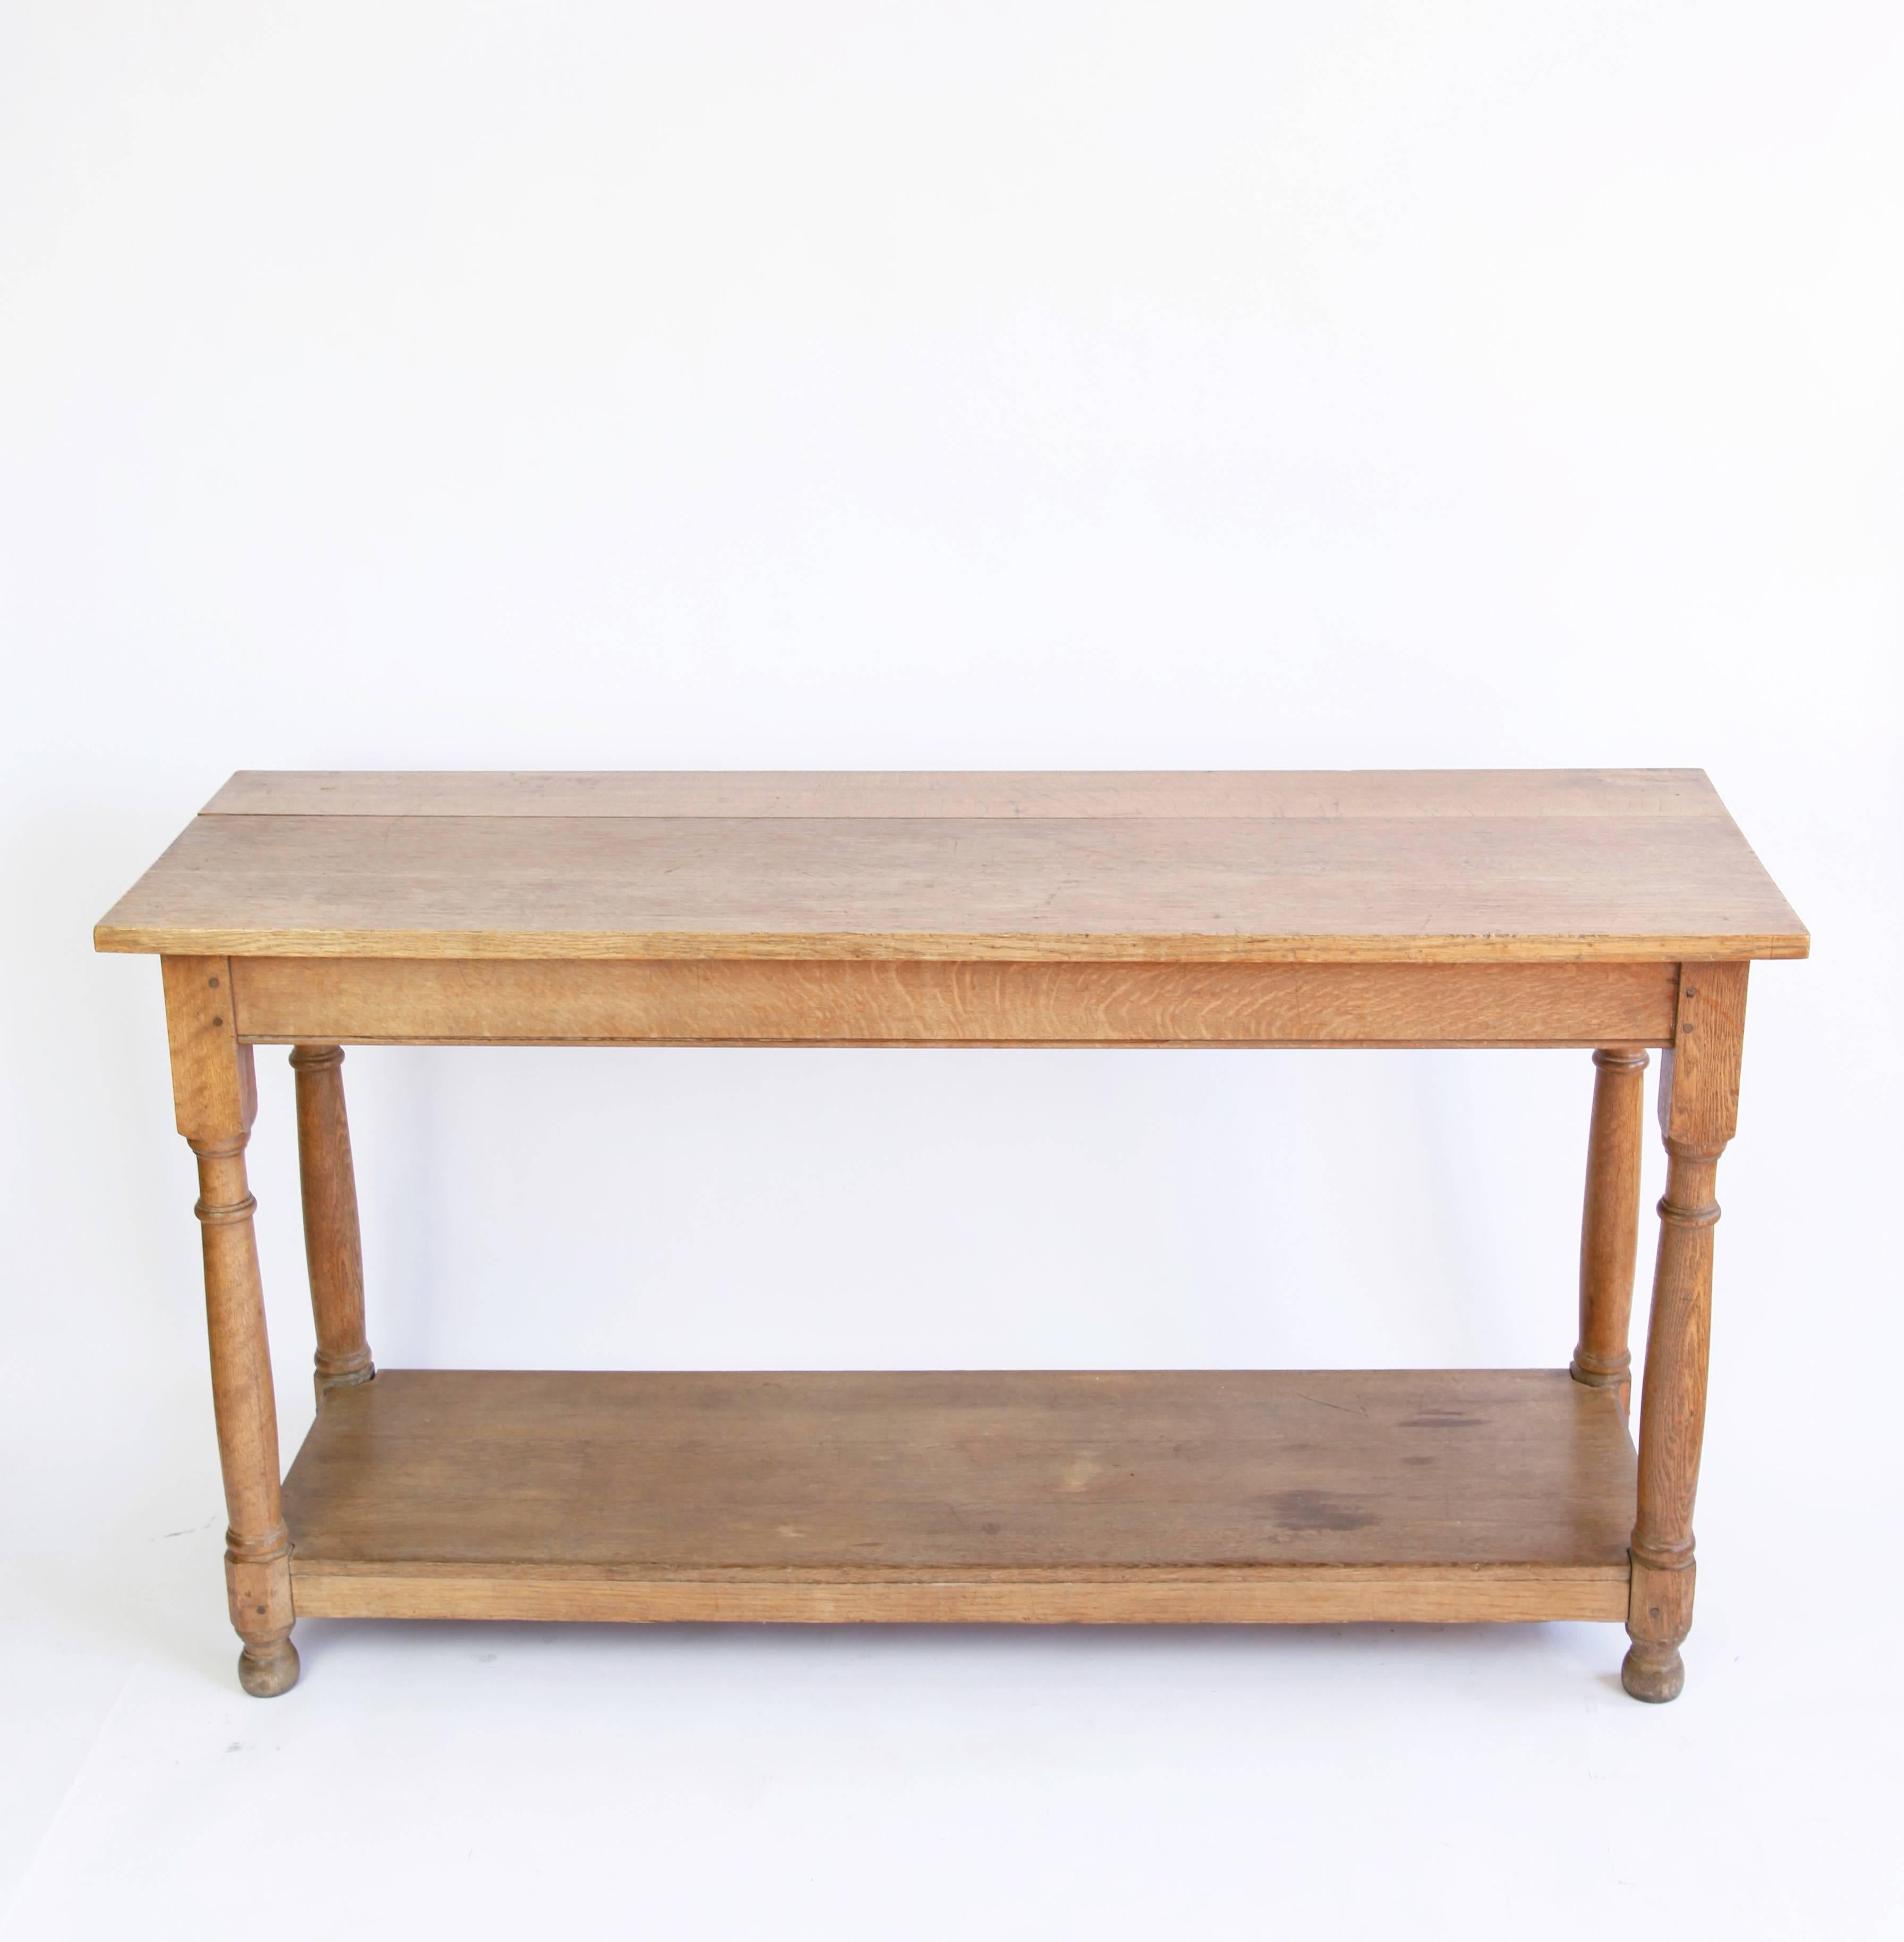 This handsome oak table with its warmly worn surface is perfect for use in a large country foyer, as an island in a roomy kitchen or sideboard in a dining room.